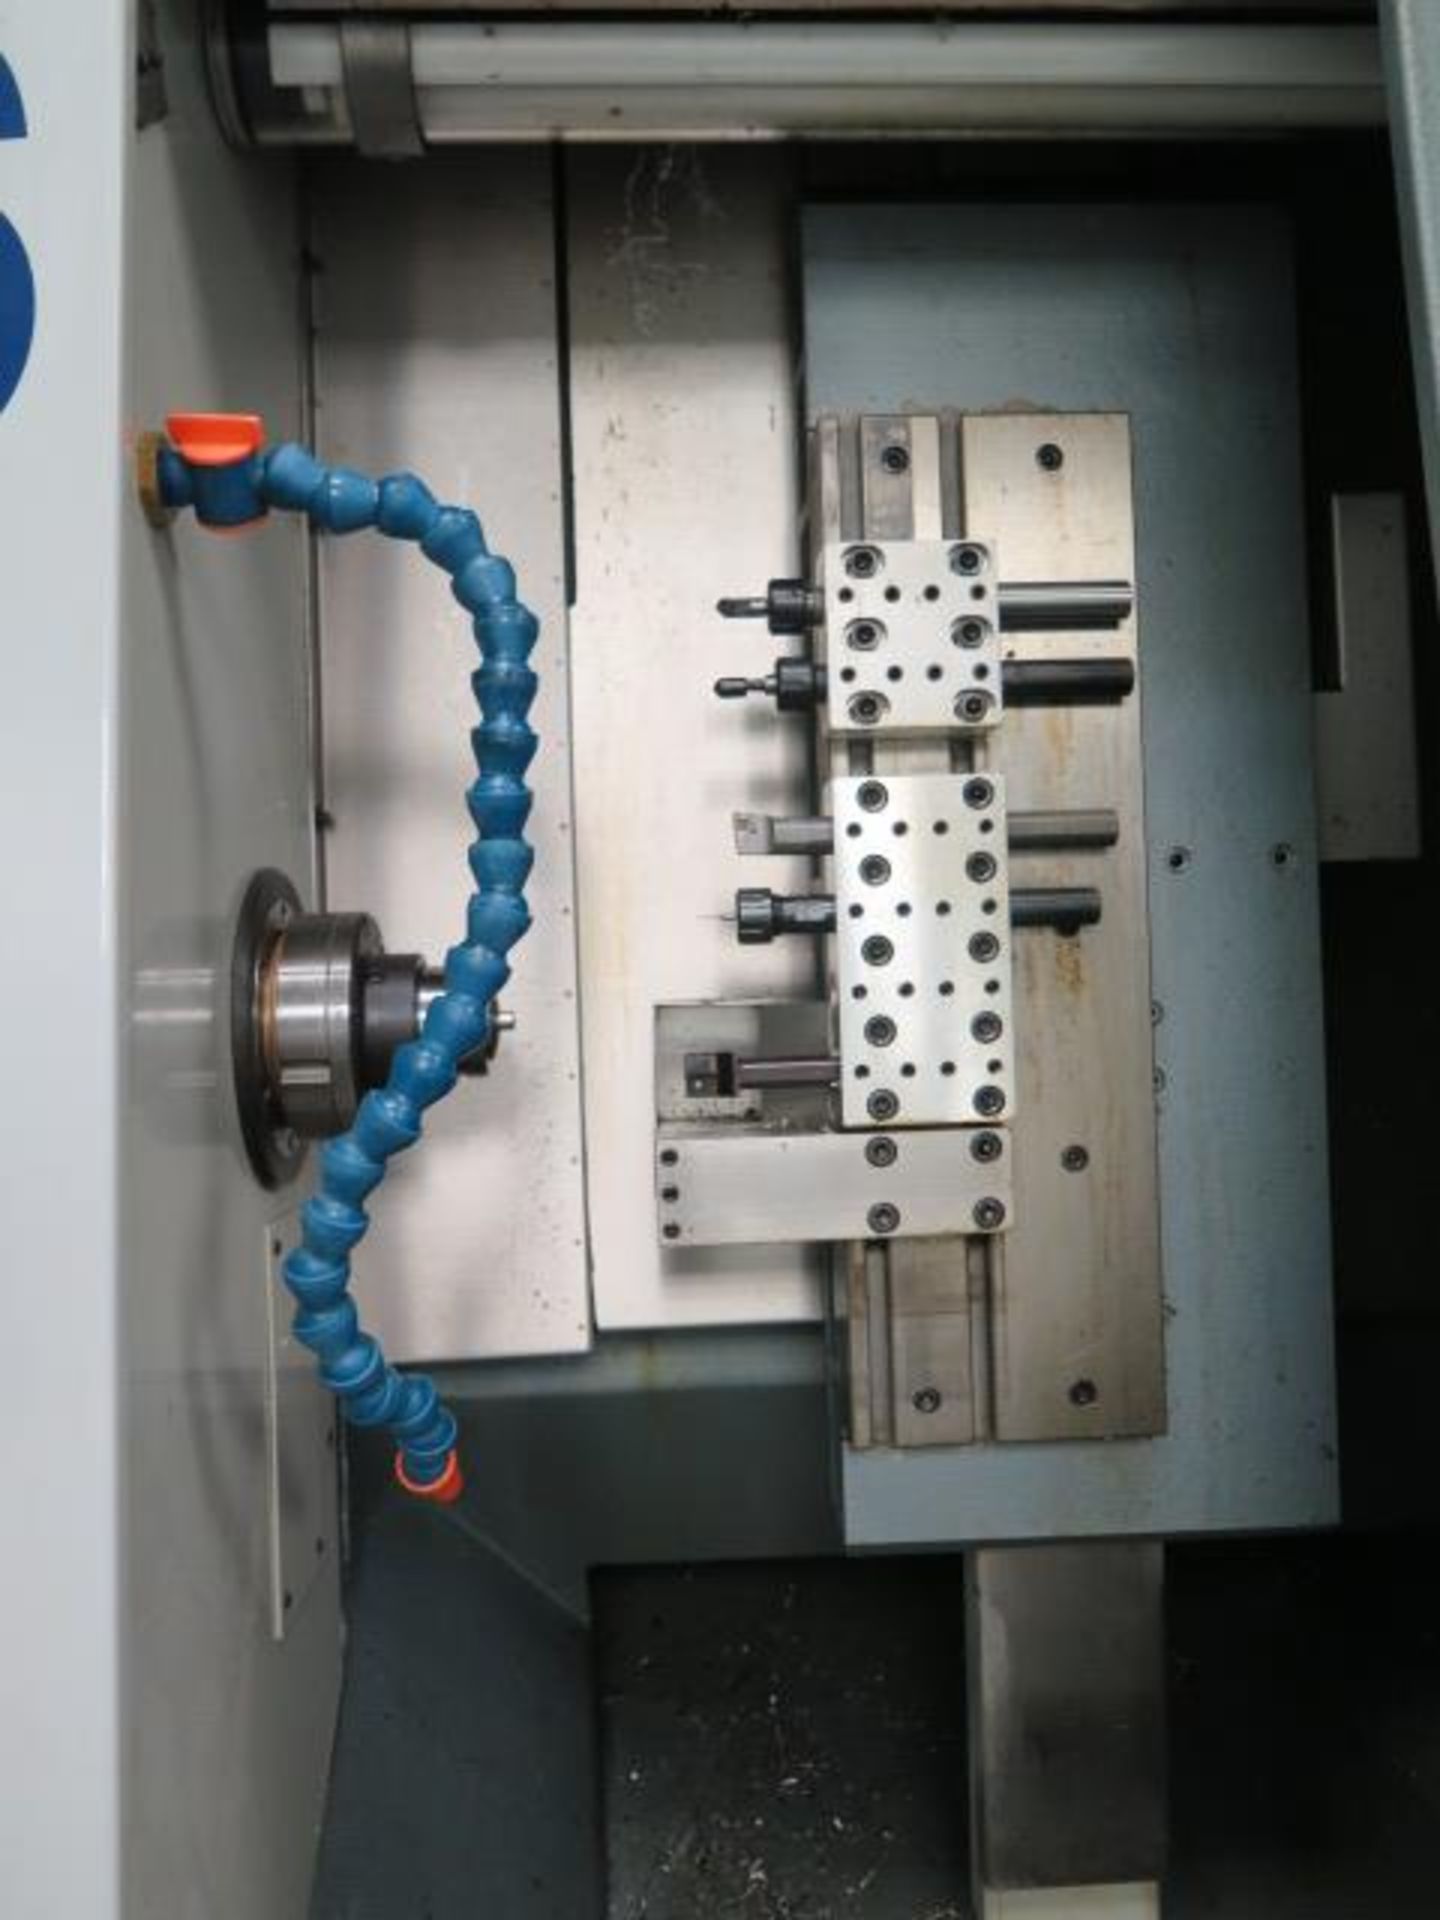 CMS mdl. GTD CNC Cross Slide Lathe w/ Fagor CNC Controls, 6000 RPM, 5C Collet Closer, SOLD AS IS - Image 5 of 14